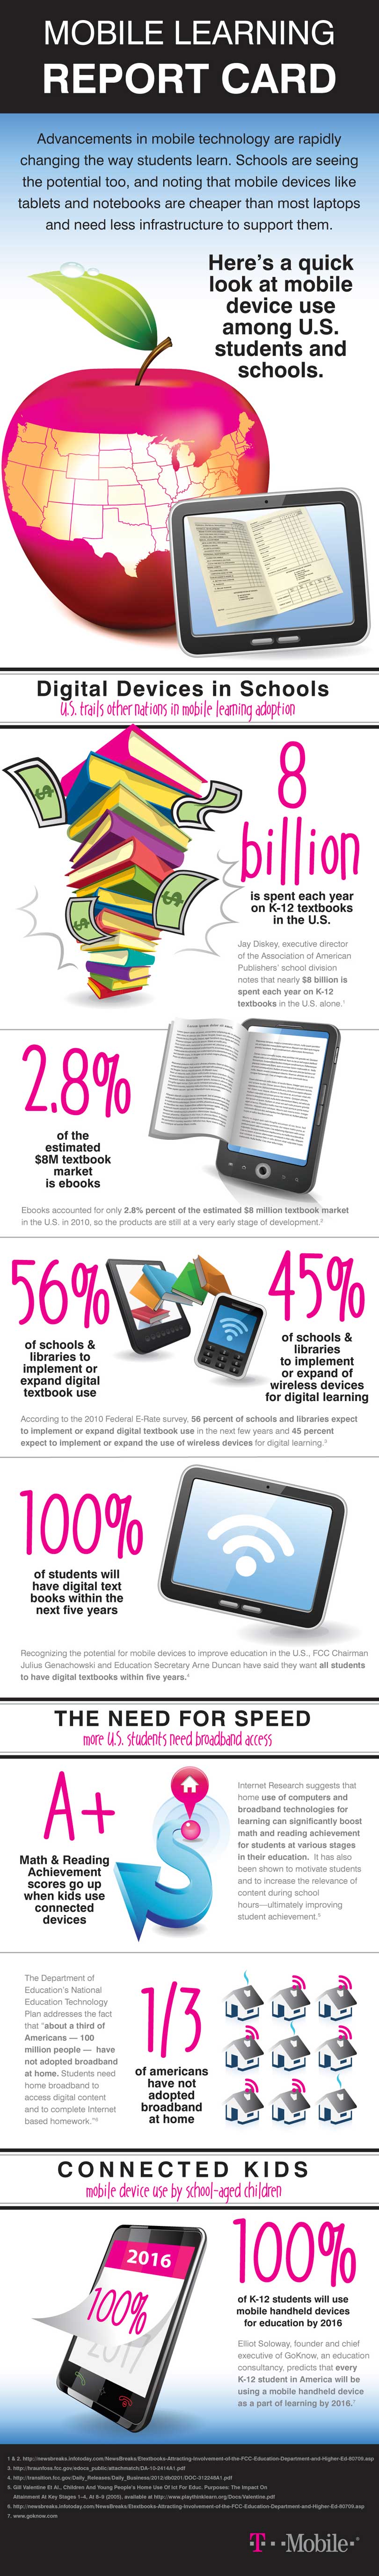 Schools Embrace Power and Potential of Mobile Technologies [Infographic]